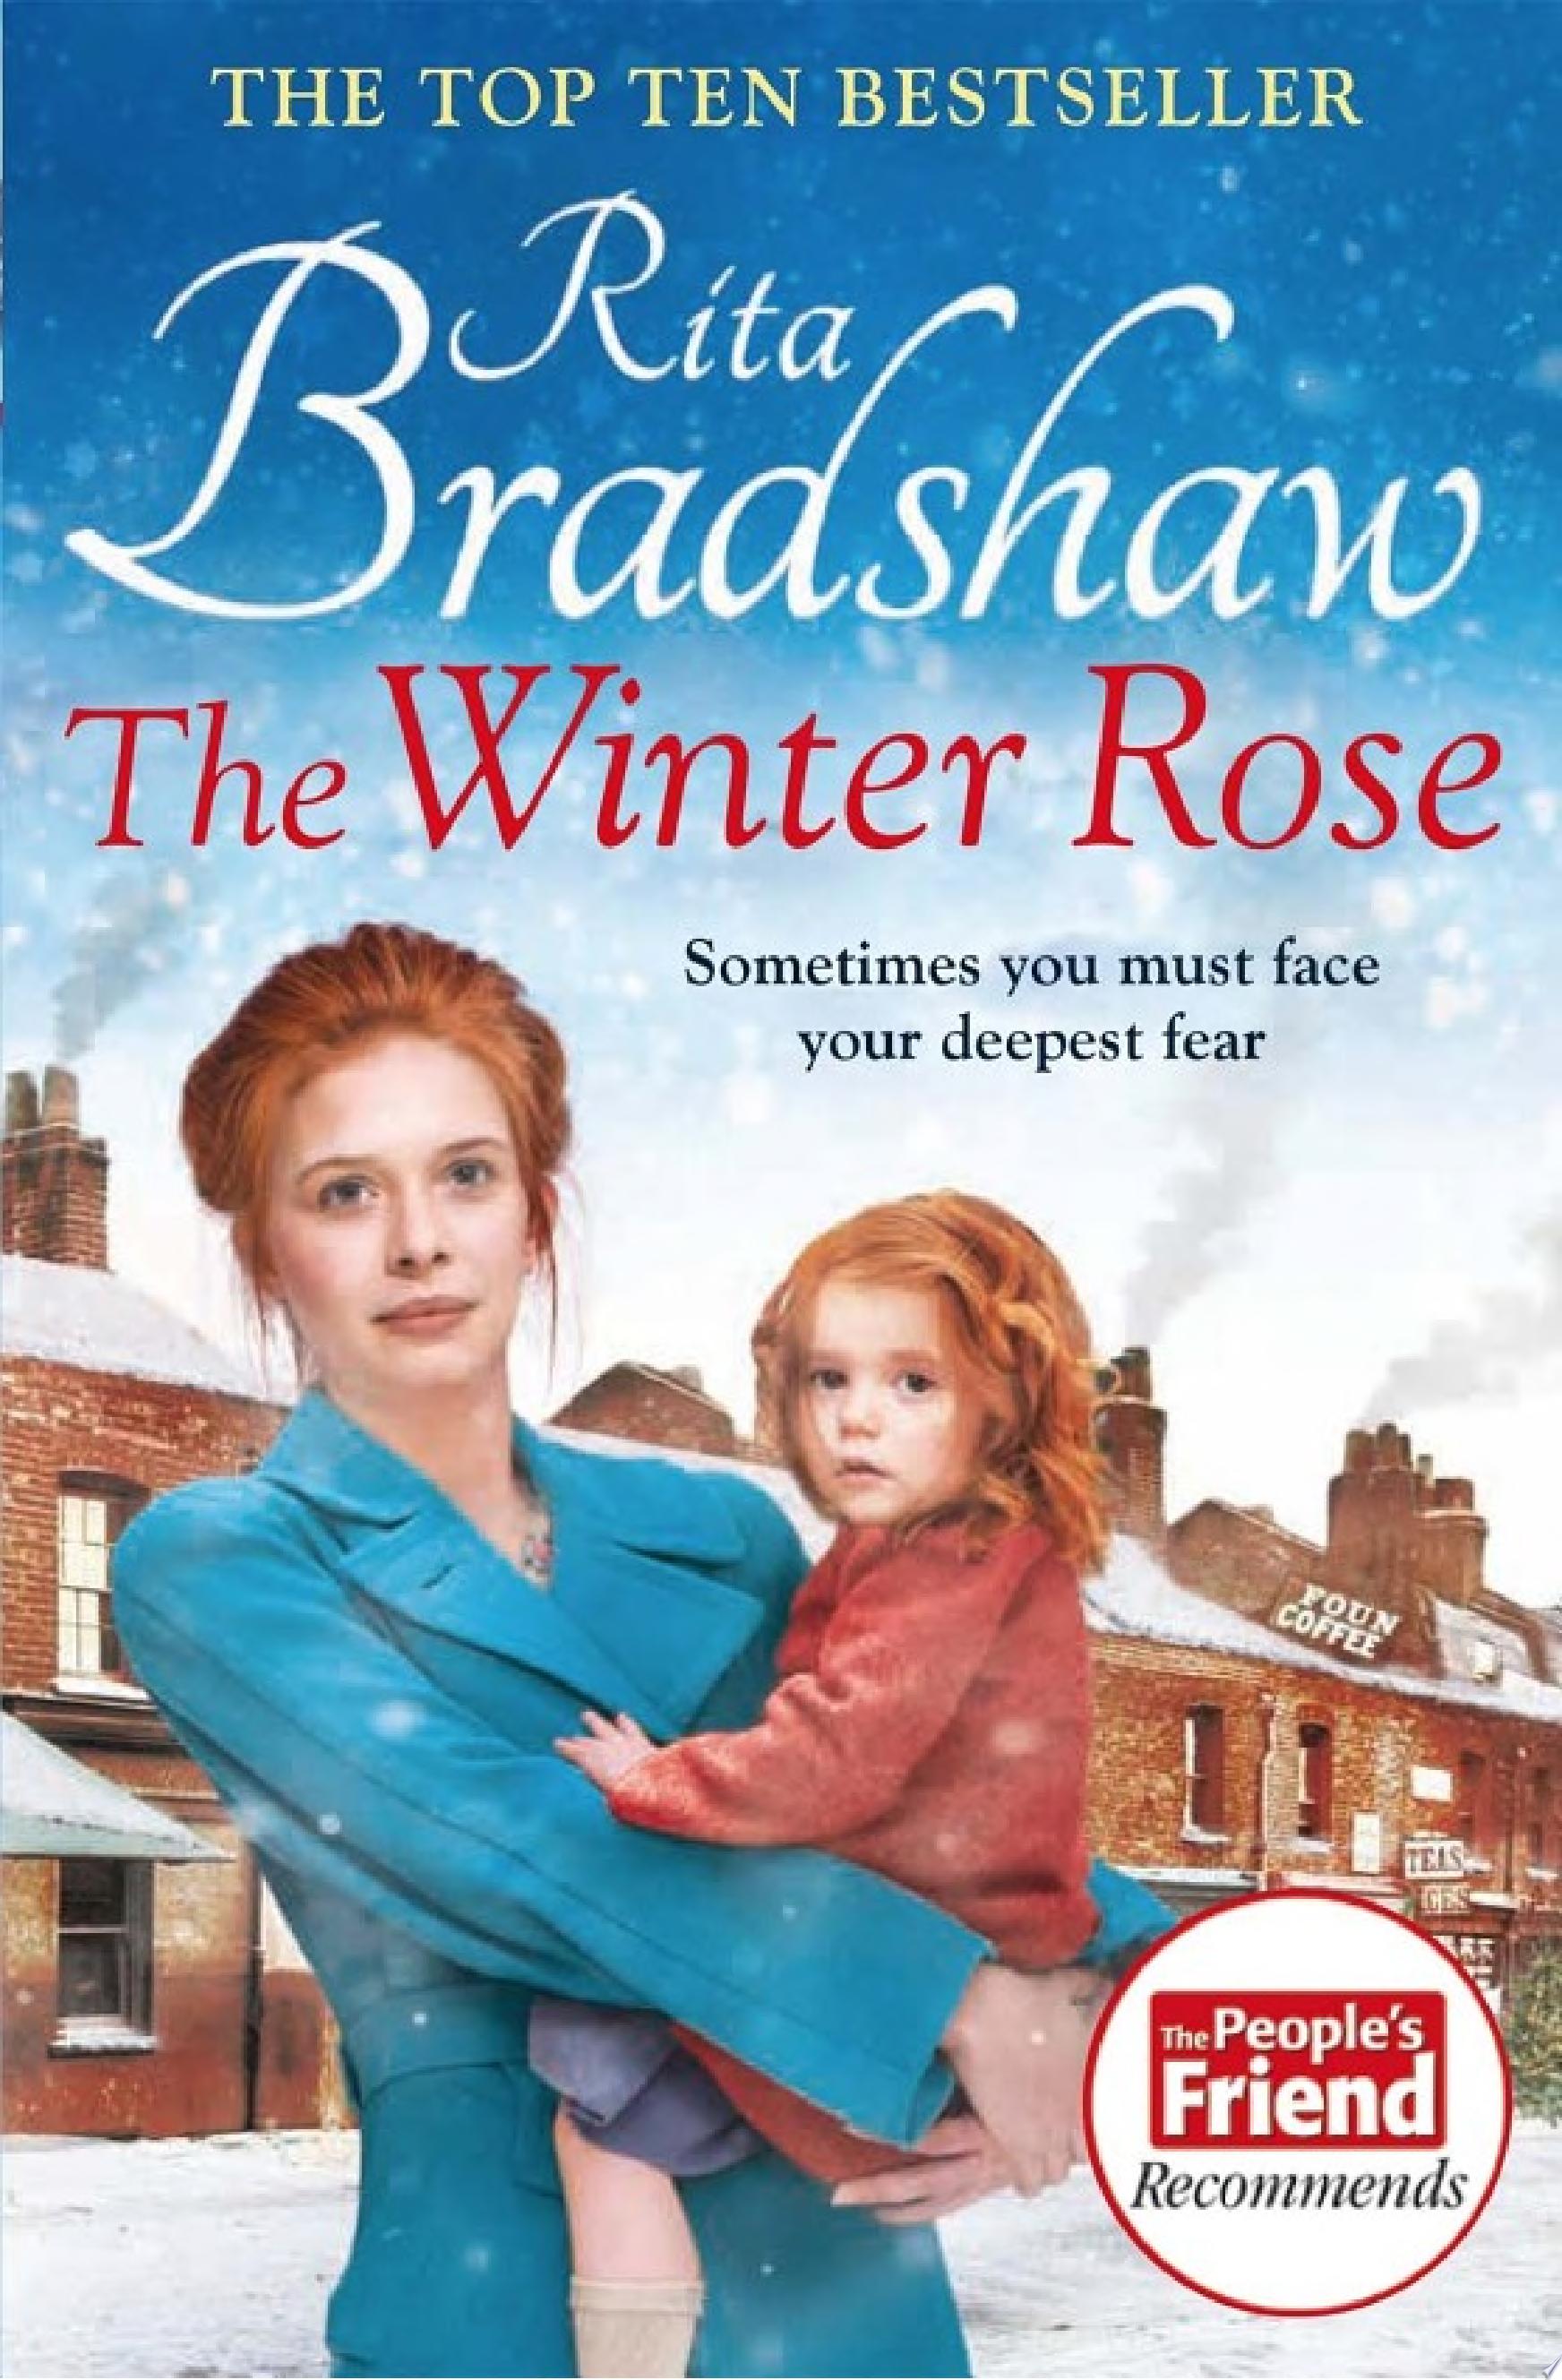 Image for "The Winter Rose"